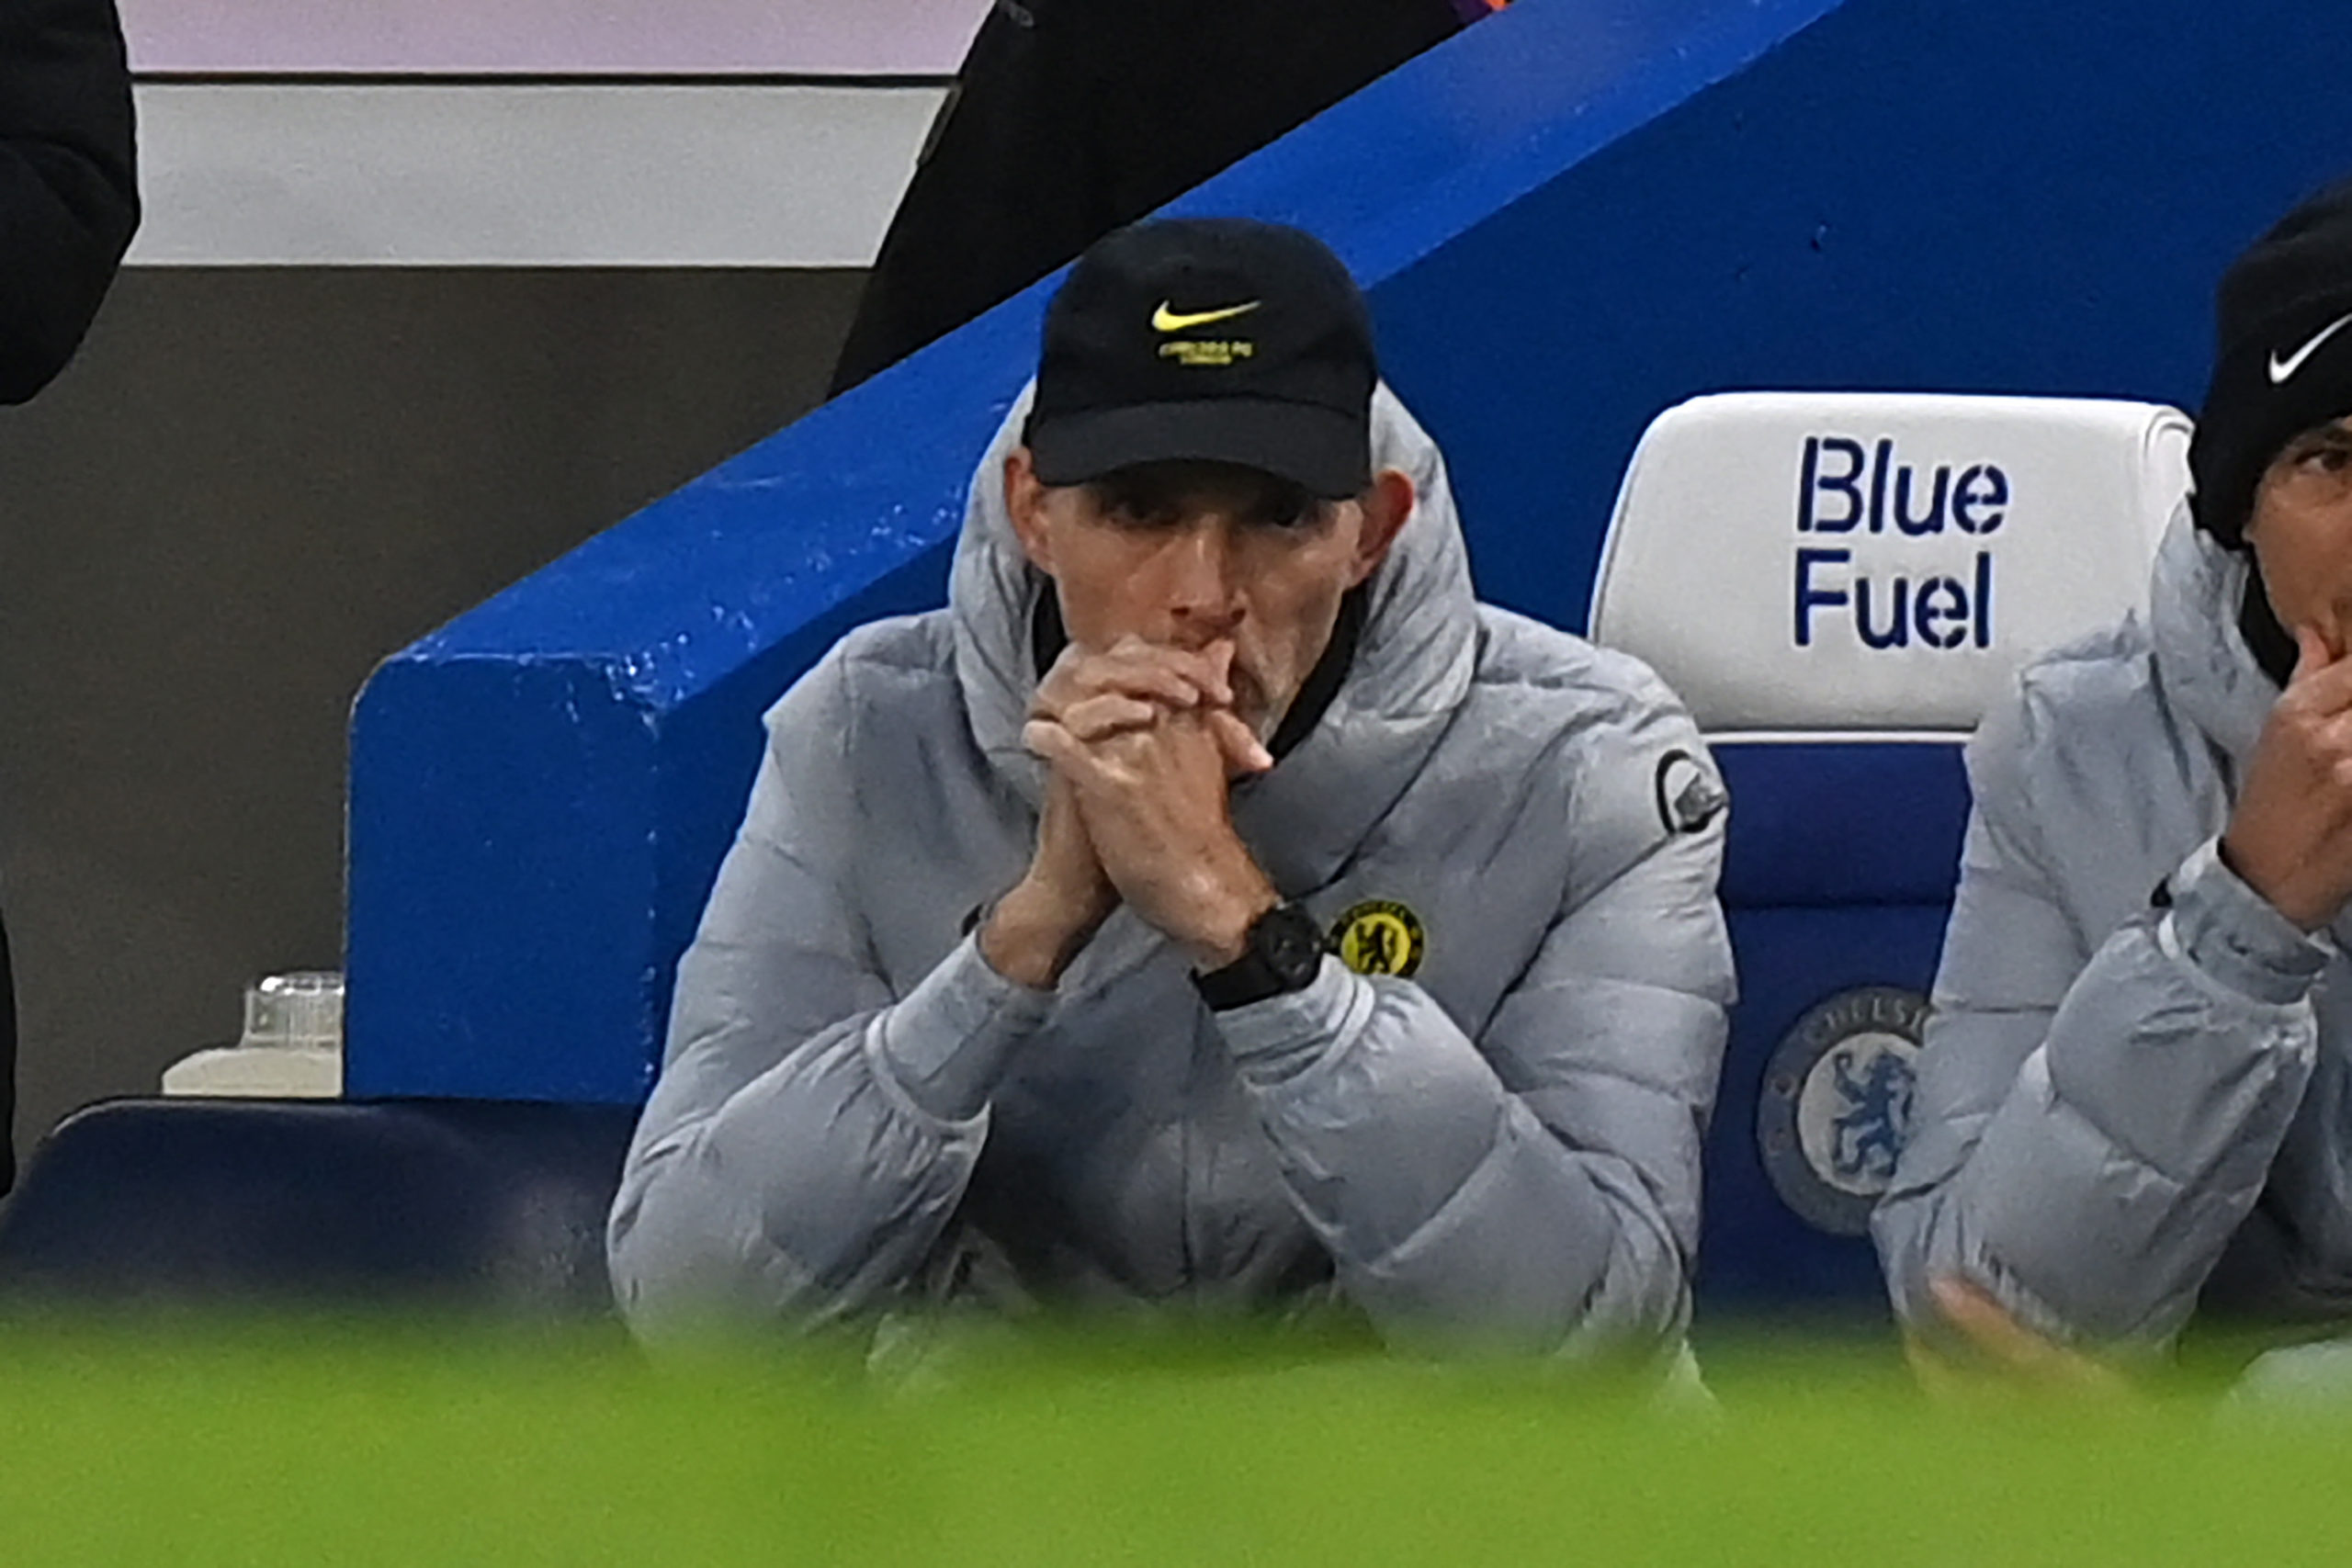 'It depends': Thomas Tuchel suggests Chelsea player may not be fit enough to play for 90 minutes